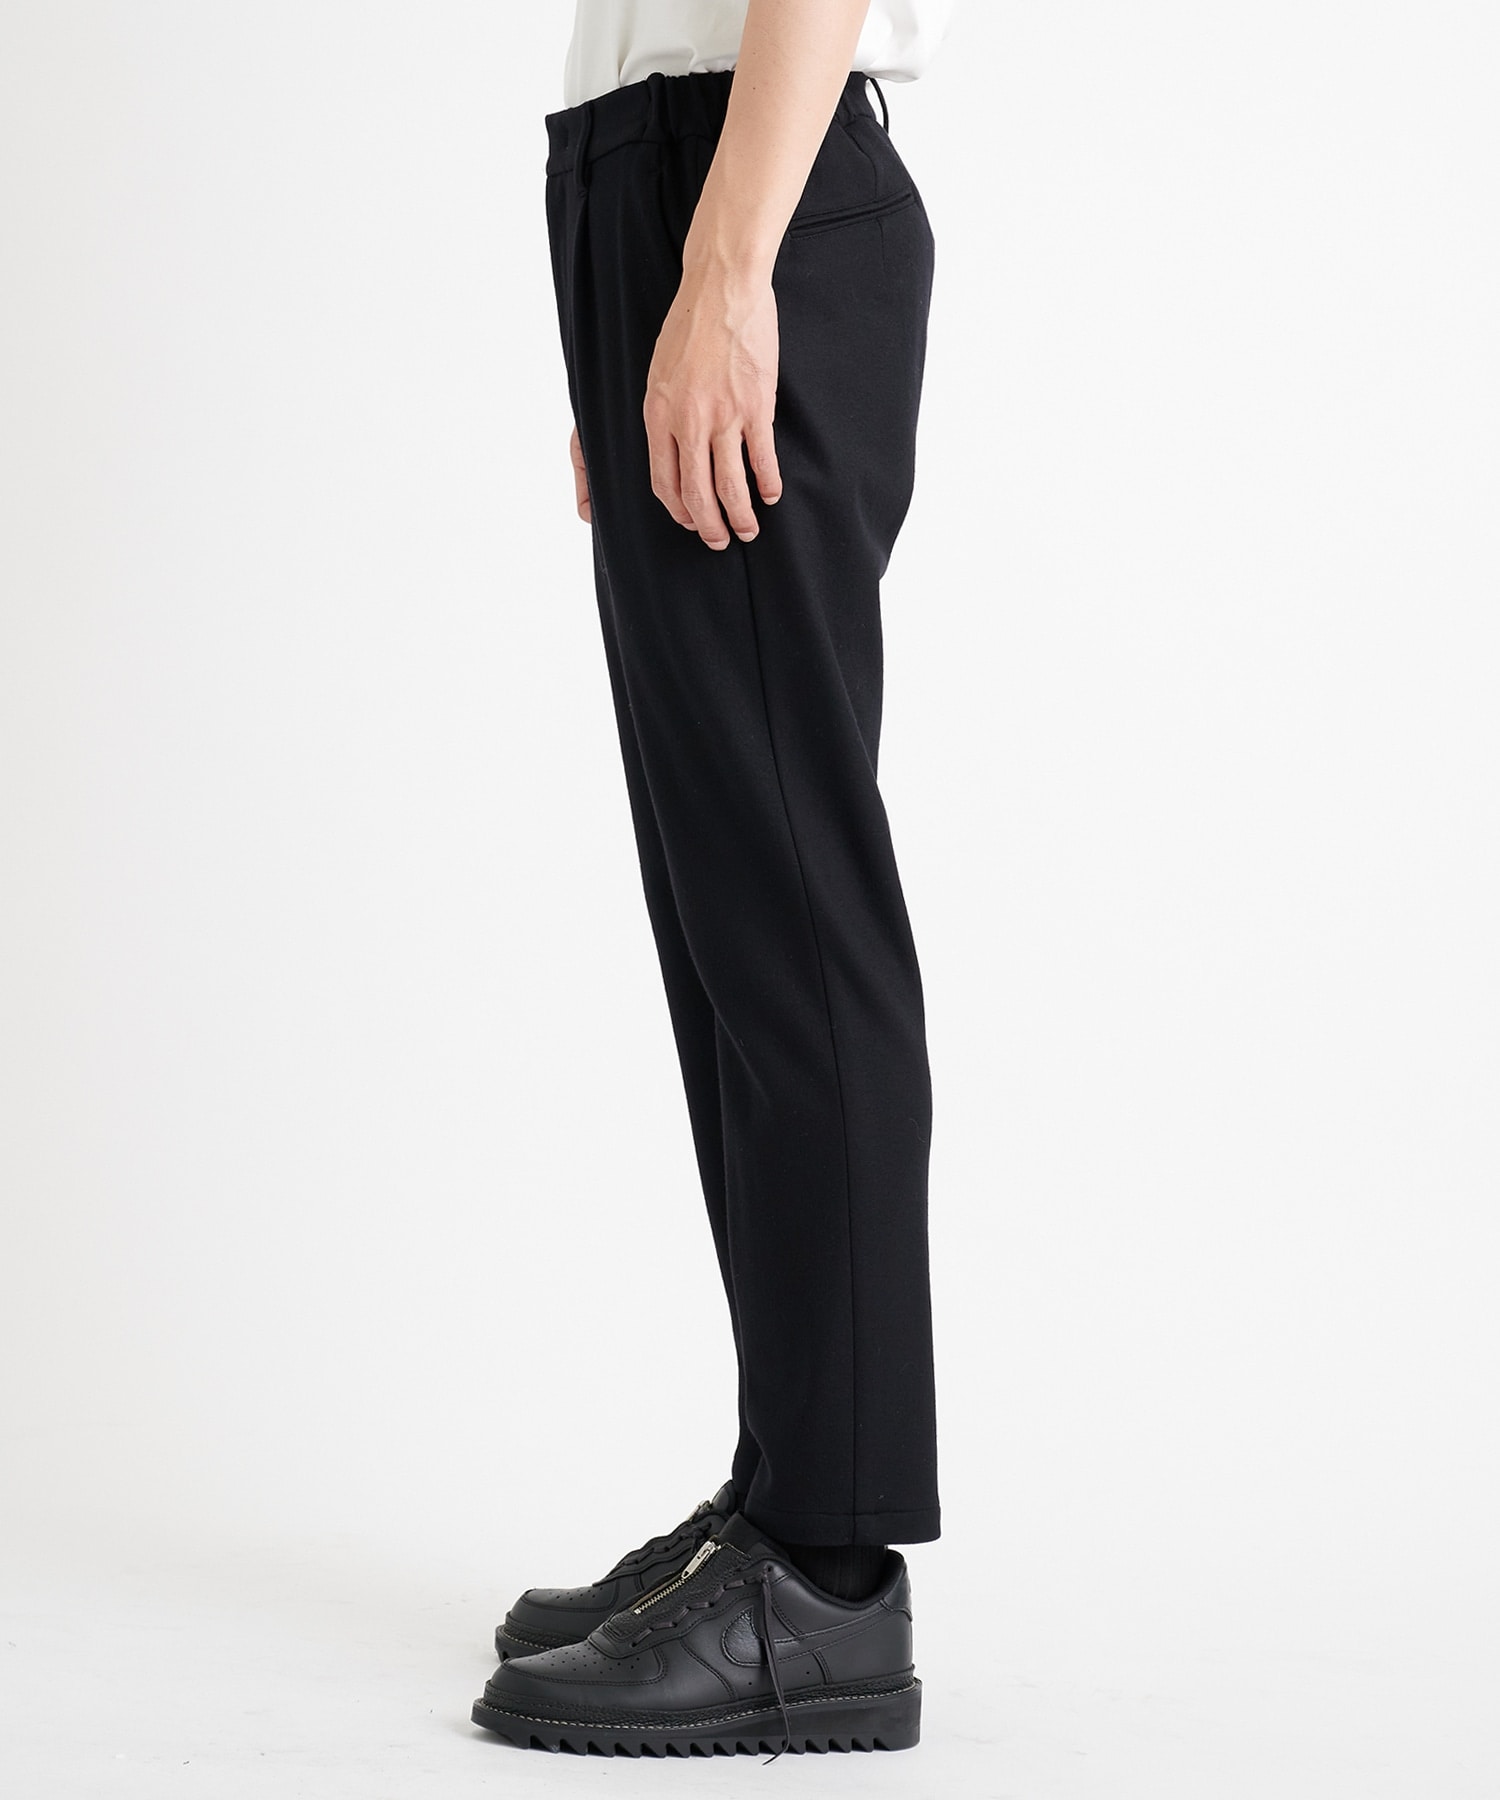 Flanne Lana Cashmere Touch Tapered Pants THE TOKYO